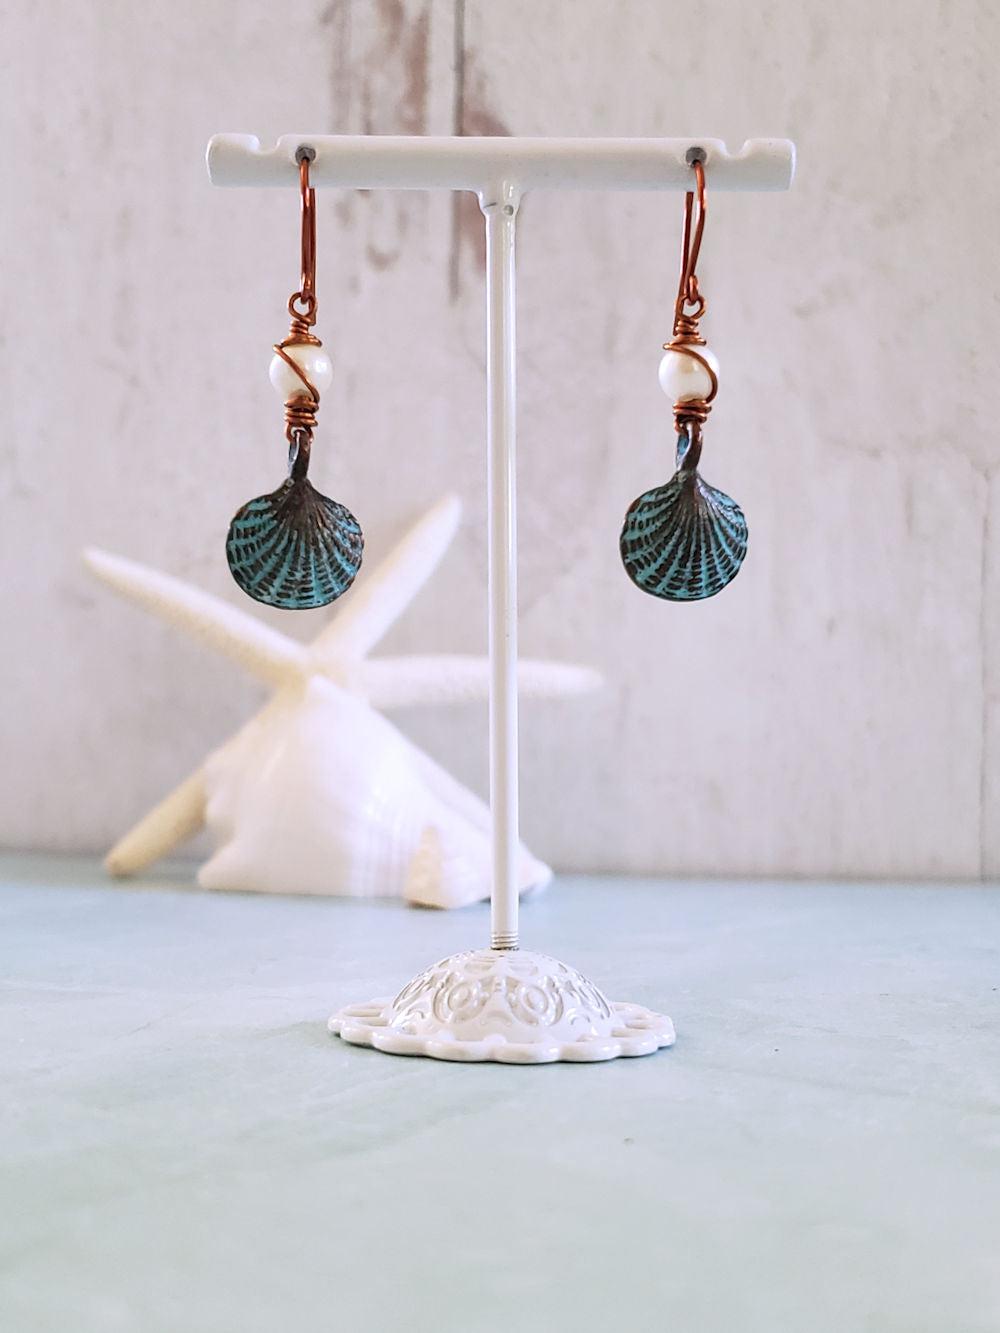 Scallop Sea Shell Earrings with Pearl on Patina Copper - Mykonos Collection